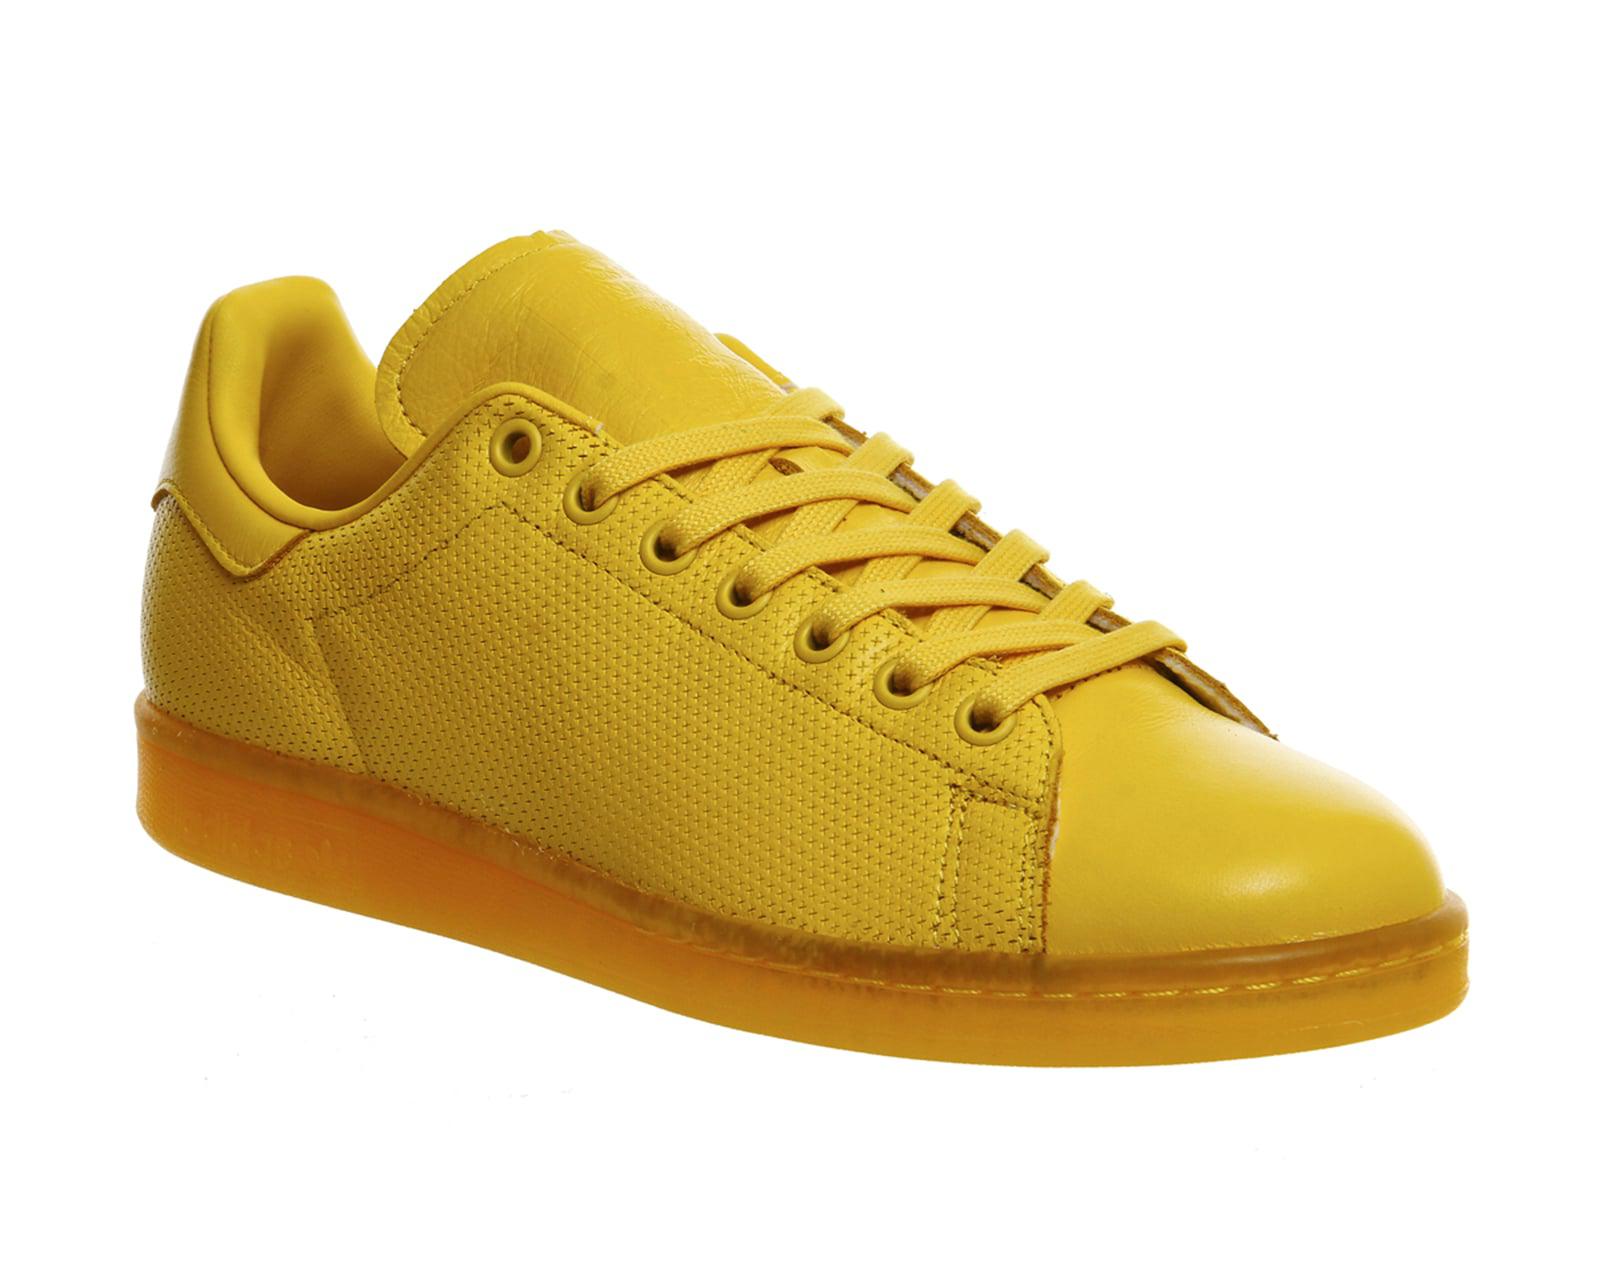 stan smith yellow shoes, great trade Save 90% available - statehouse.gov.sl